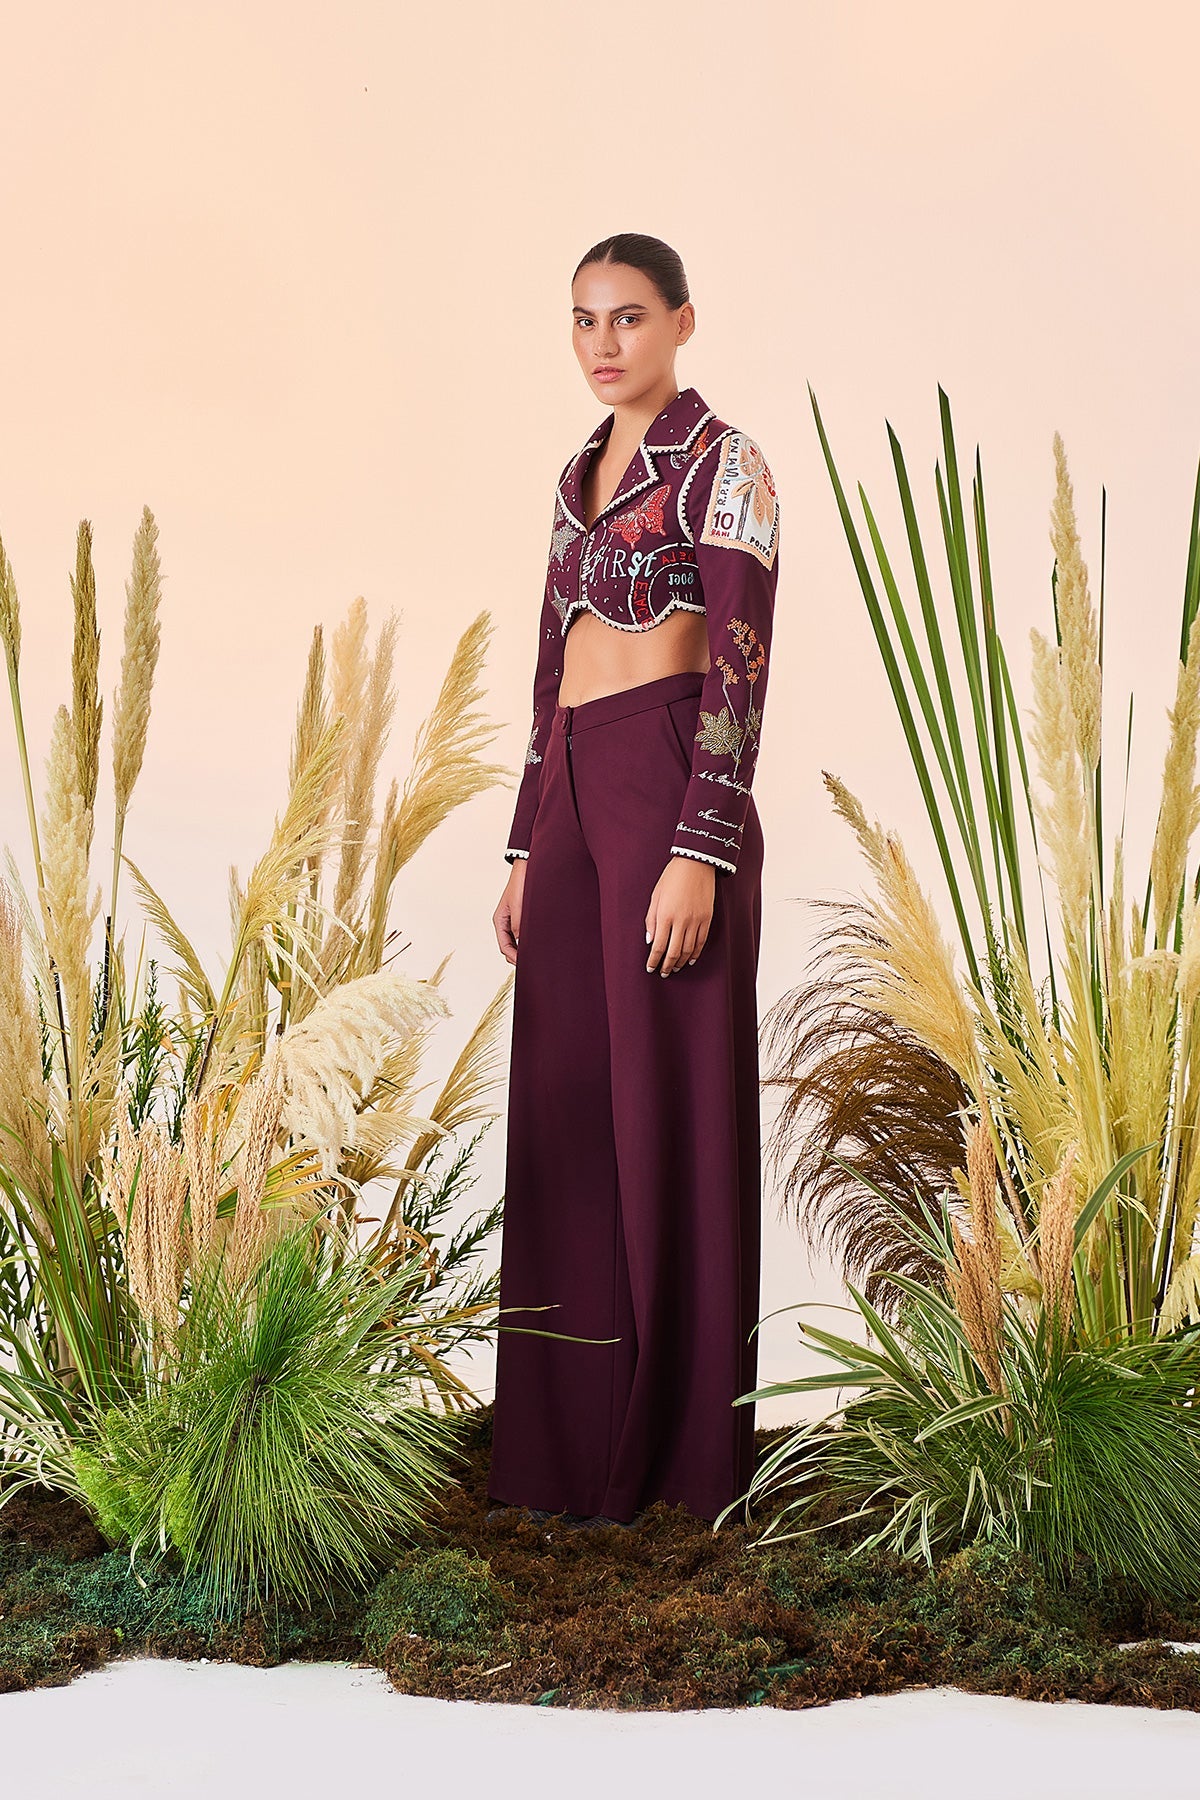 Asfa Sinha in Postcard Cropped Blazer And Flared Pant